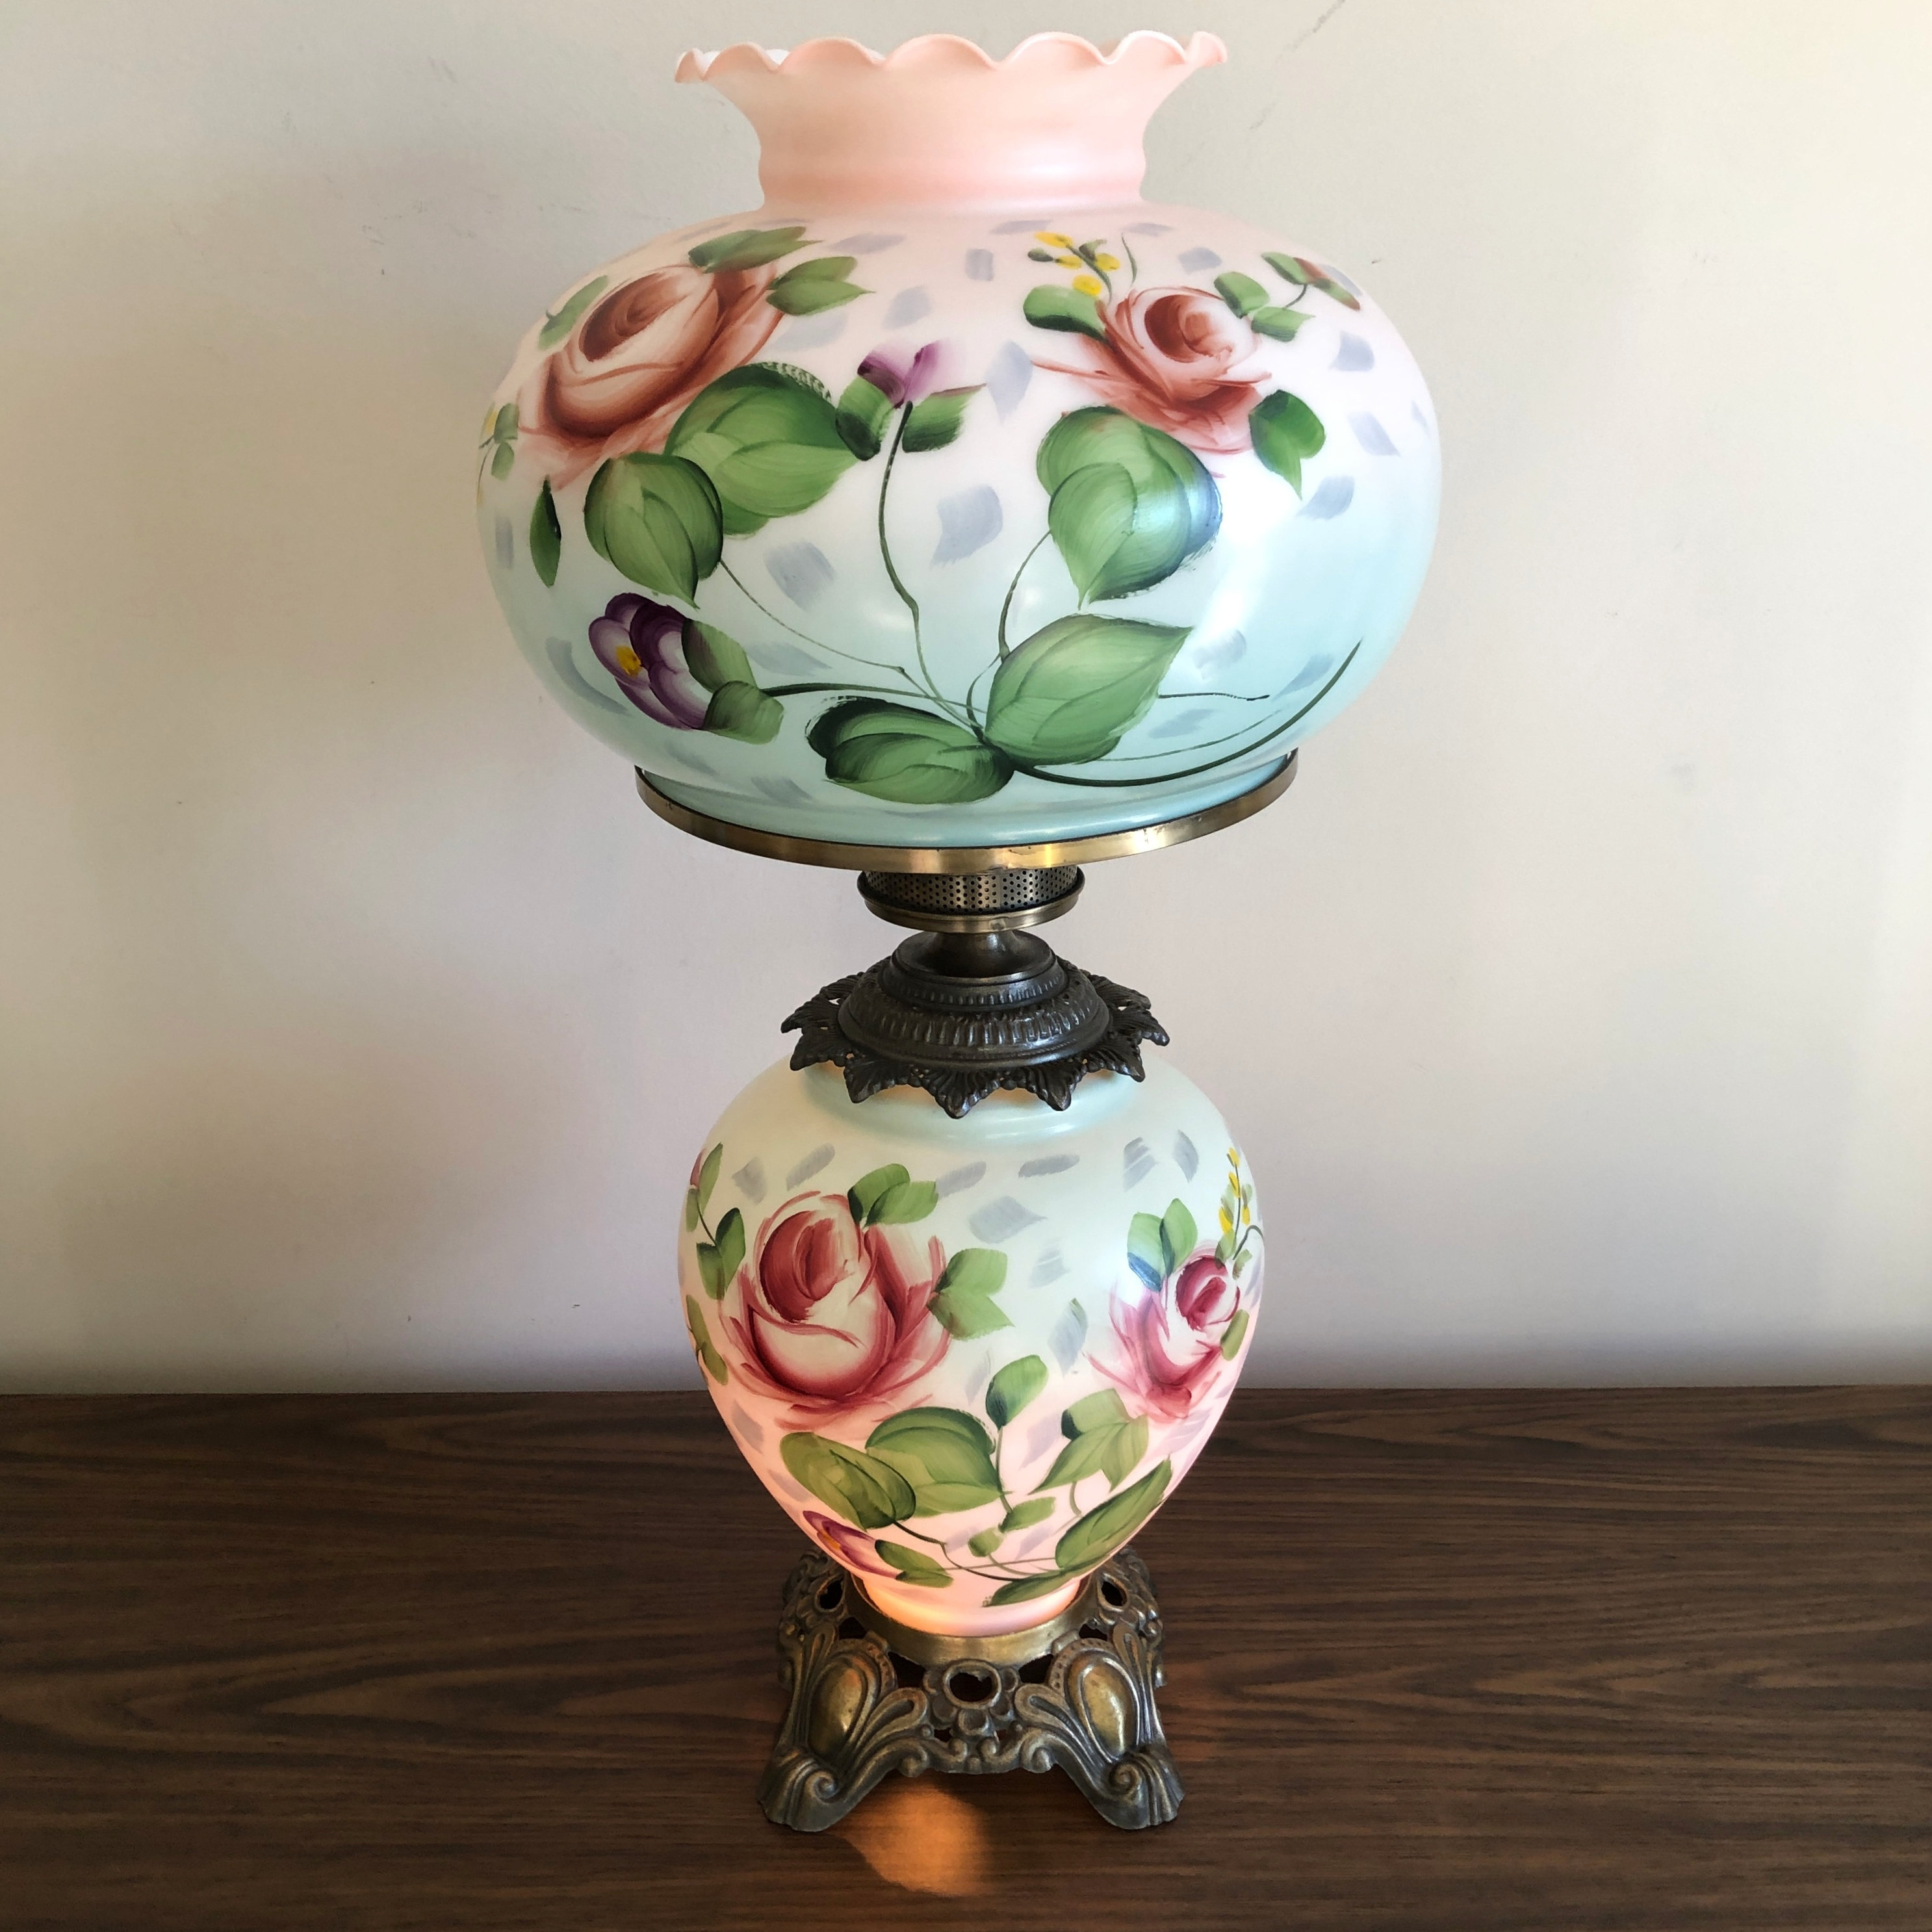 Large Vintage Rose Hurricane Lamp, Hand Painted Roses 3-way Floral Lamp,  Parlor Lamp, Bedroom Lamp, GWTW Table Lamp 